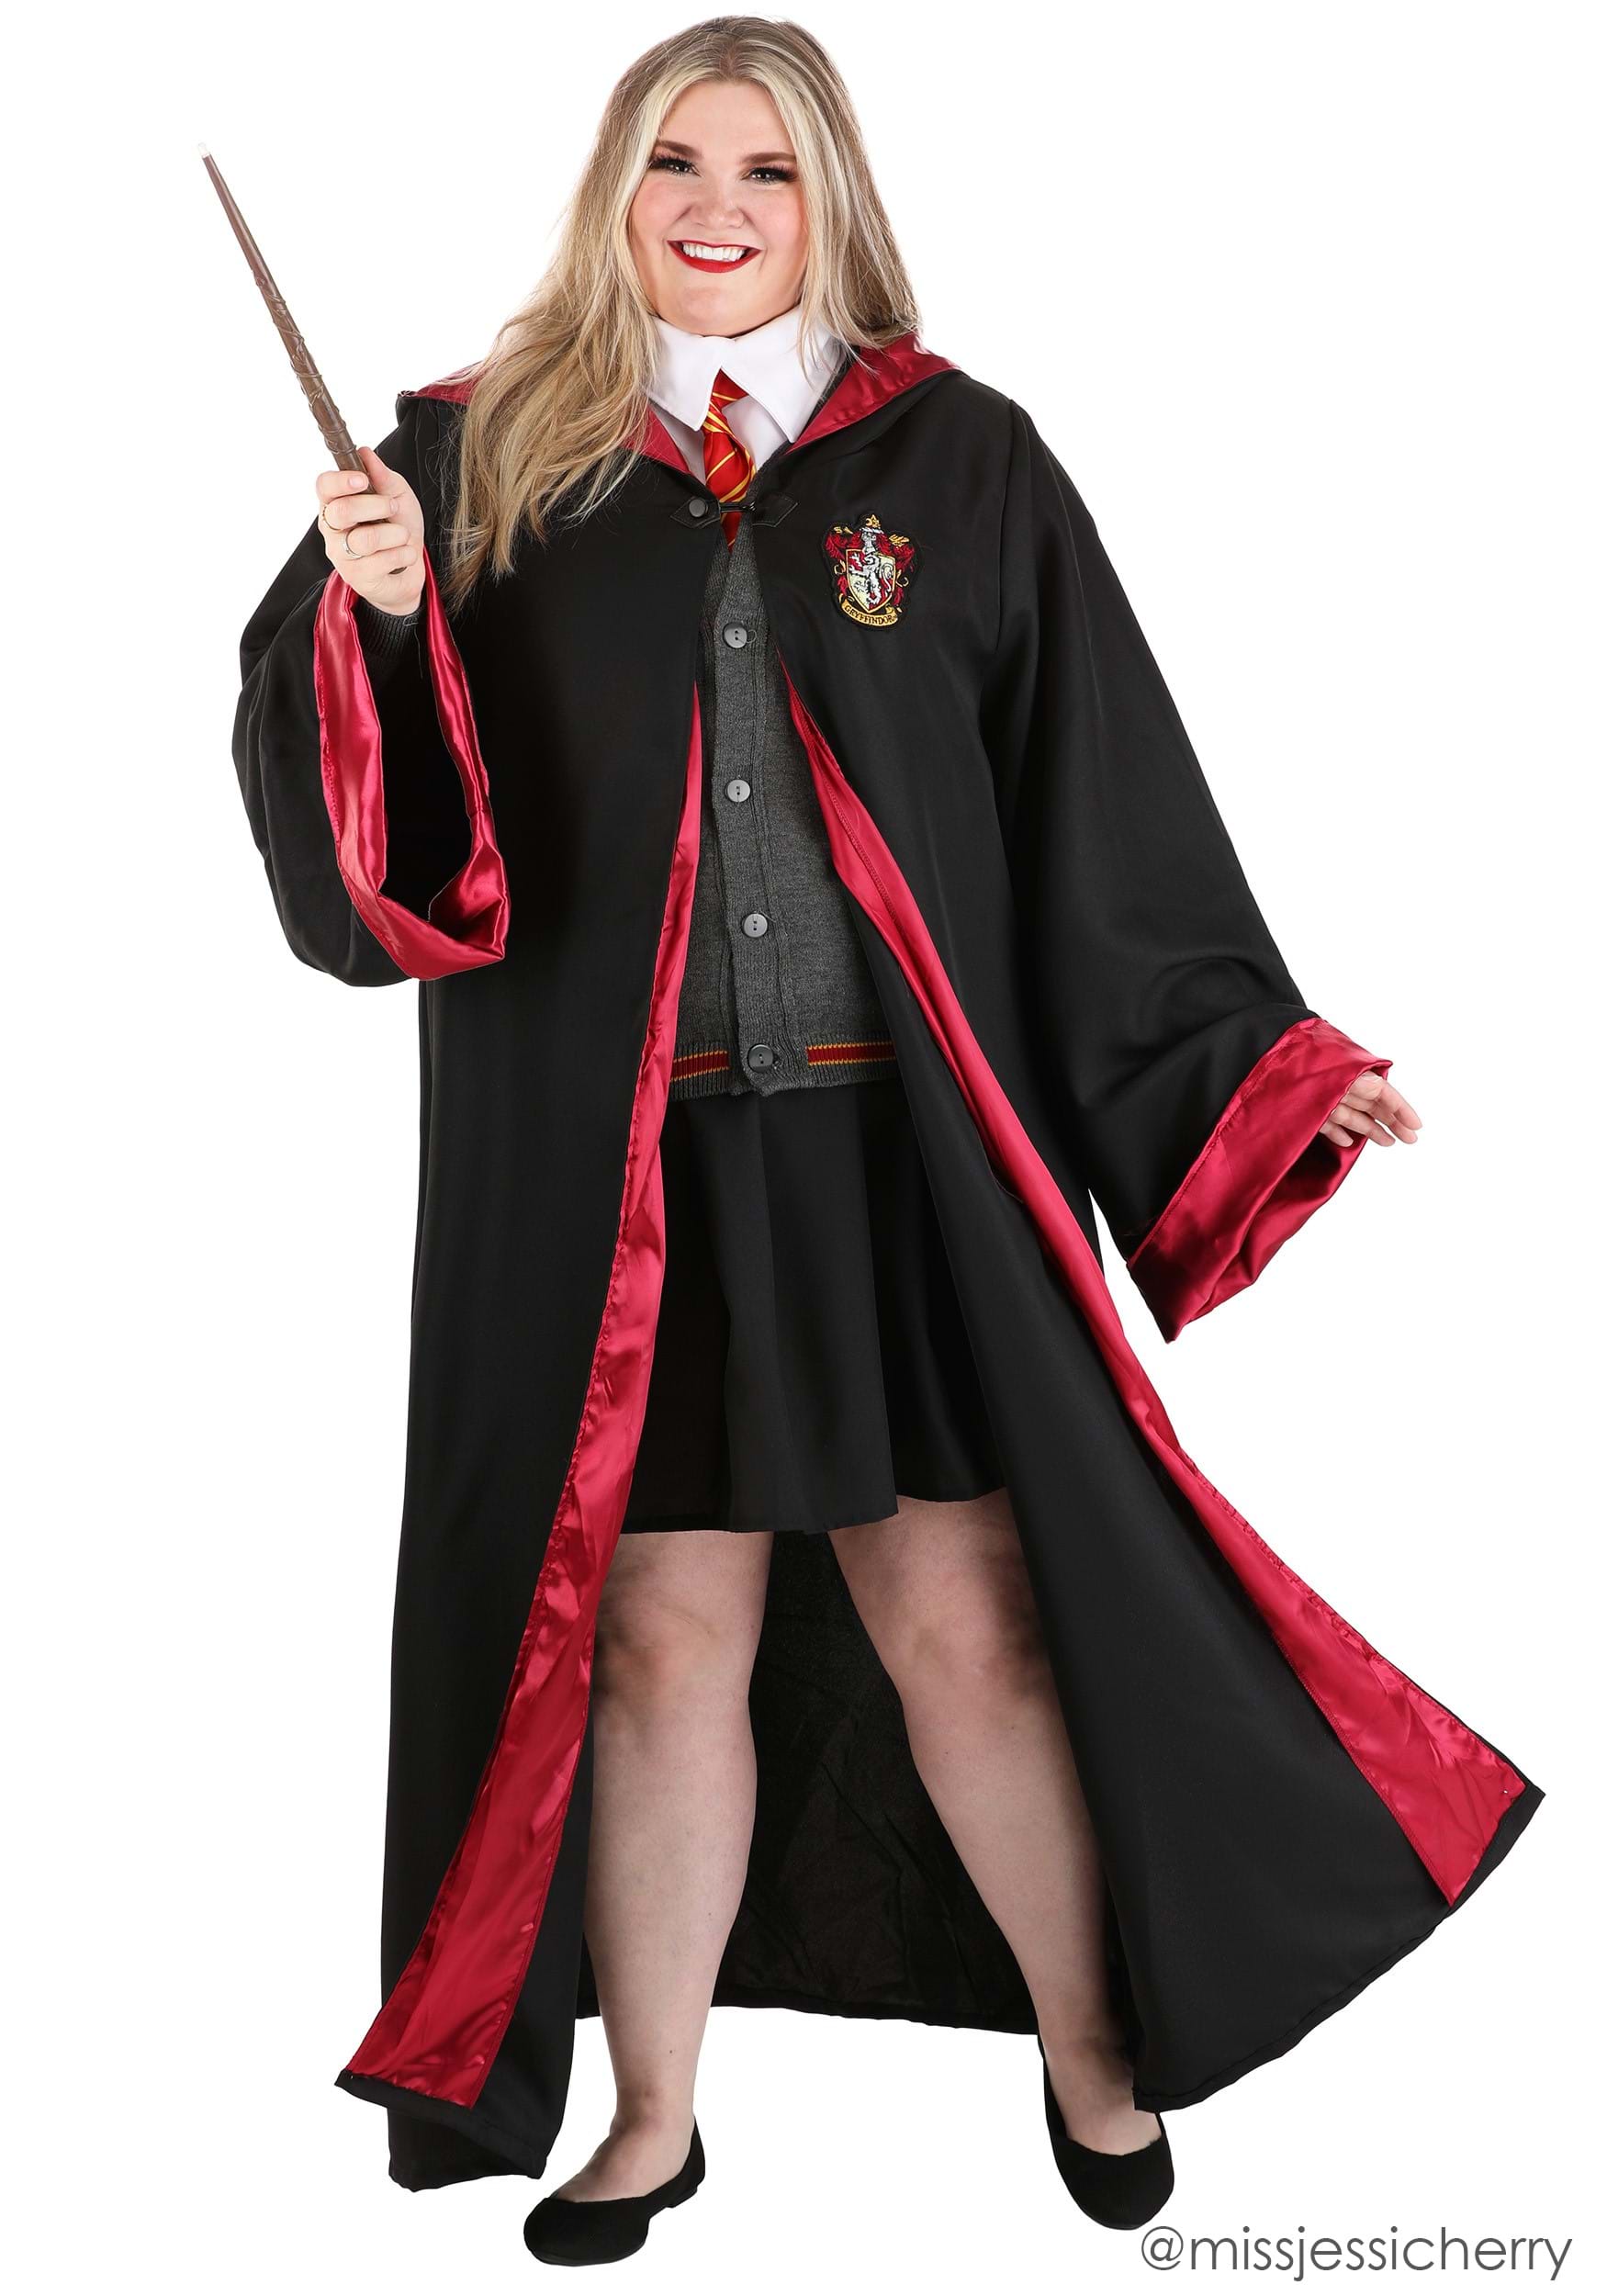 https://images.halloweencostumes.com/products/64160/1-1/deluxe-plus-size-harry-potter-hermione-costume-2.jpg